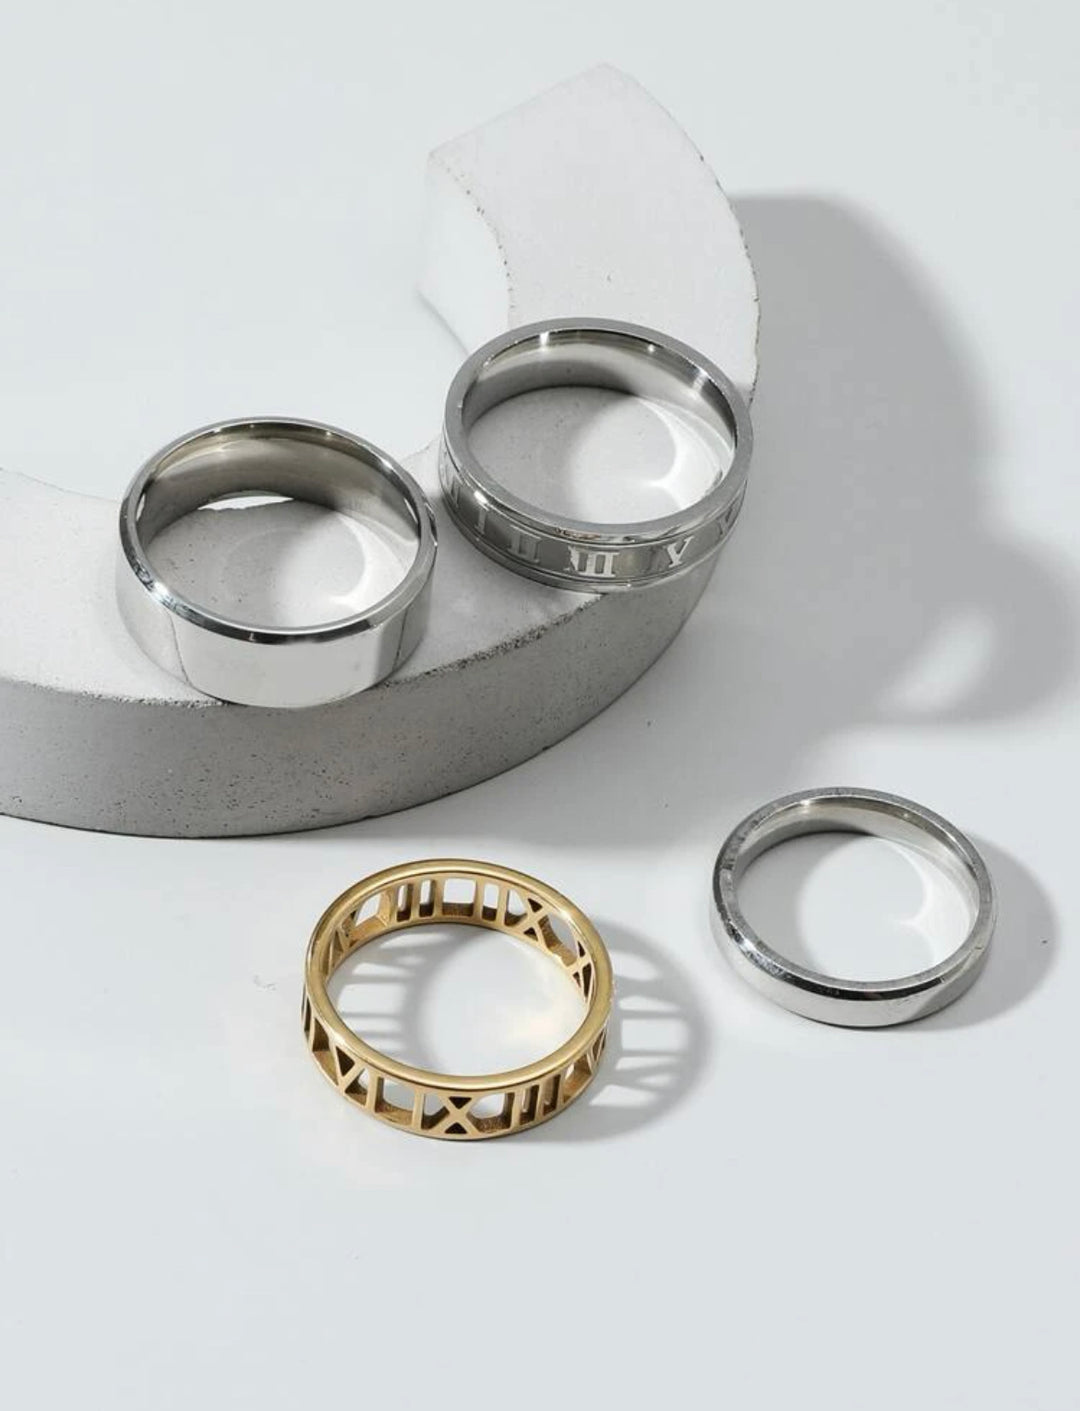 4pc Men Hollow Out Ring